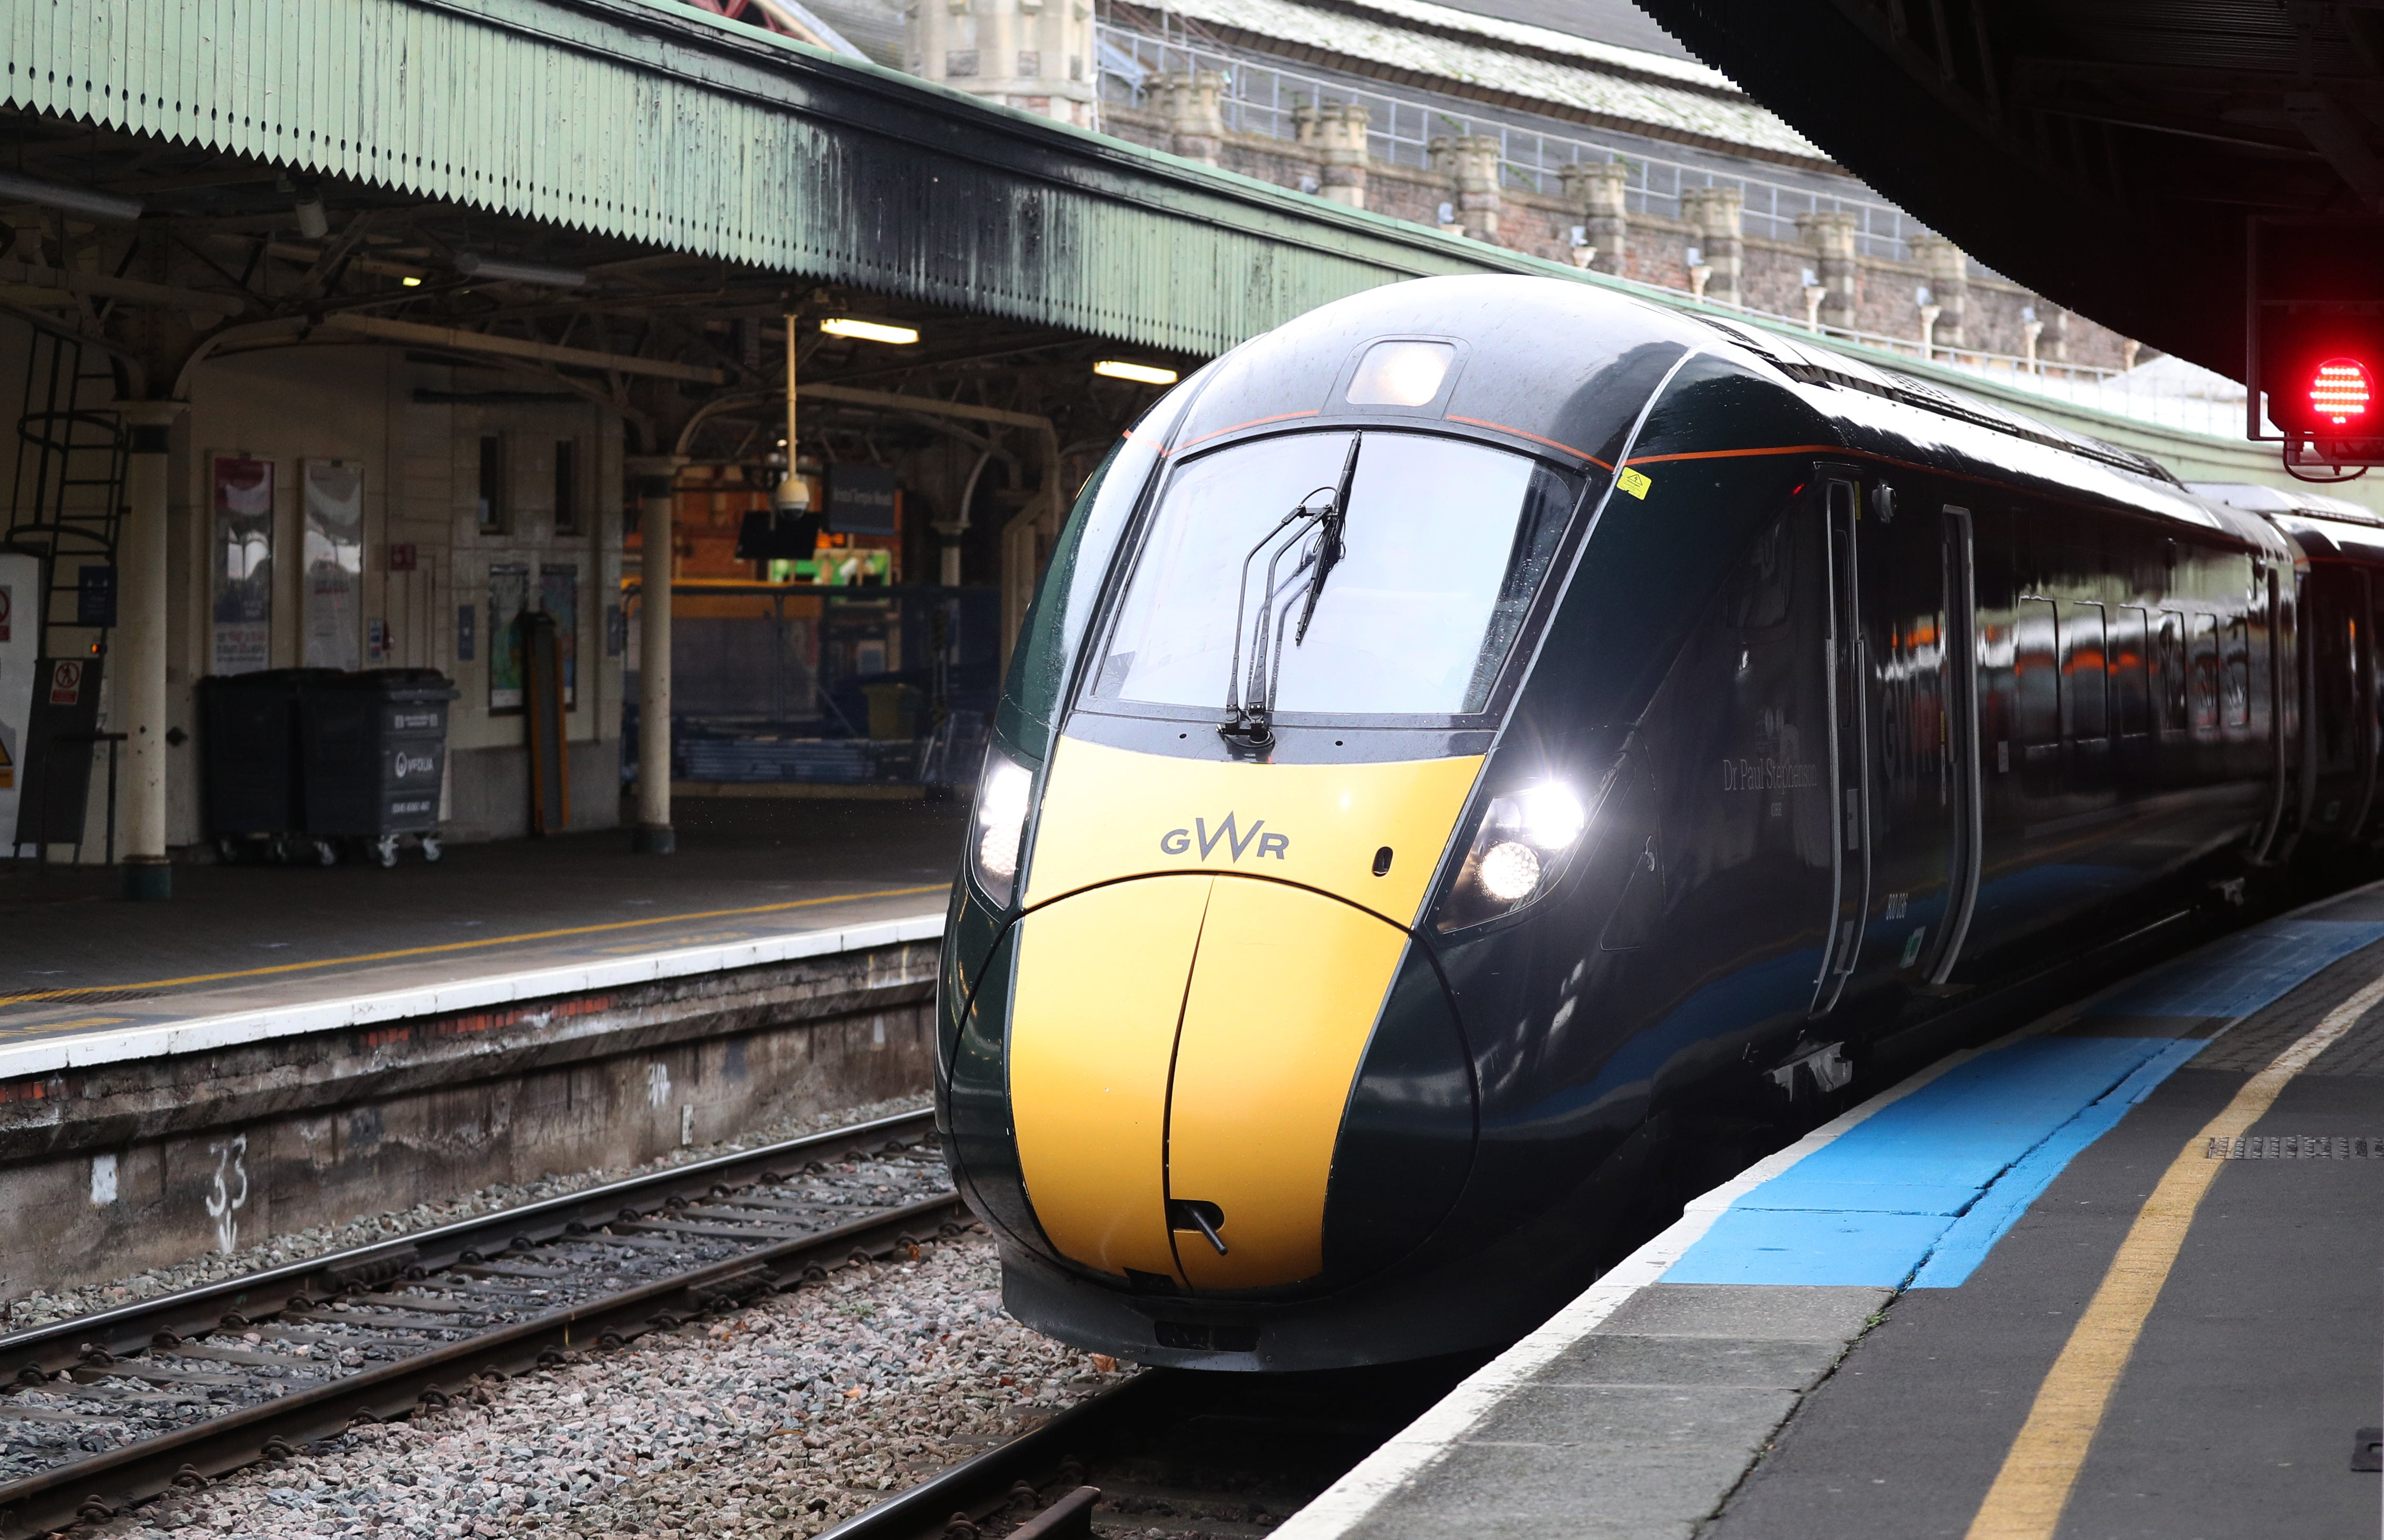 Great Western Railway services are among those affected by the strike